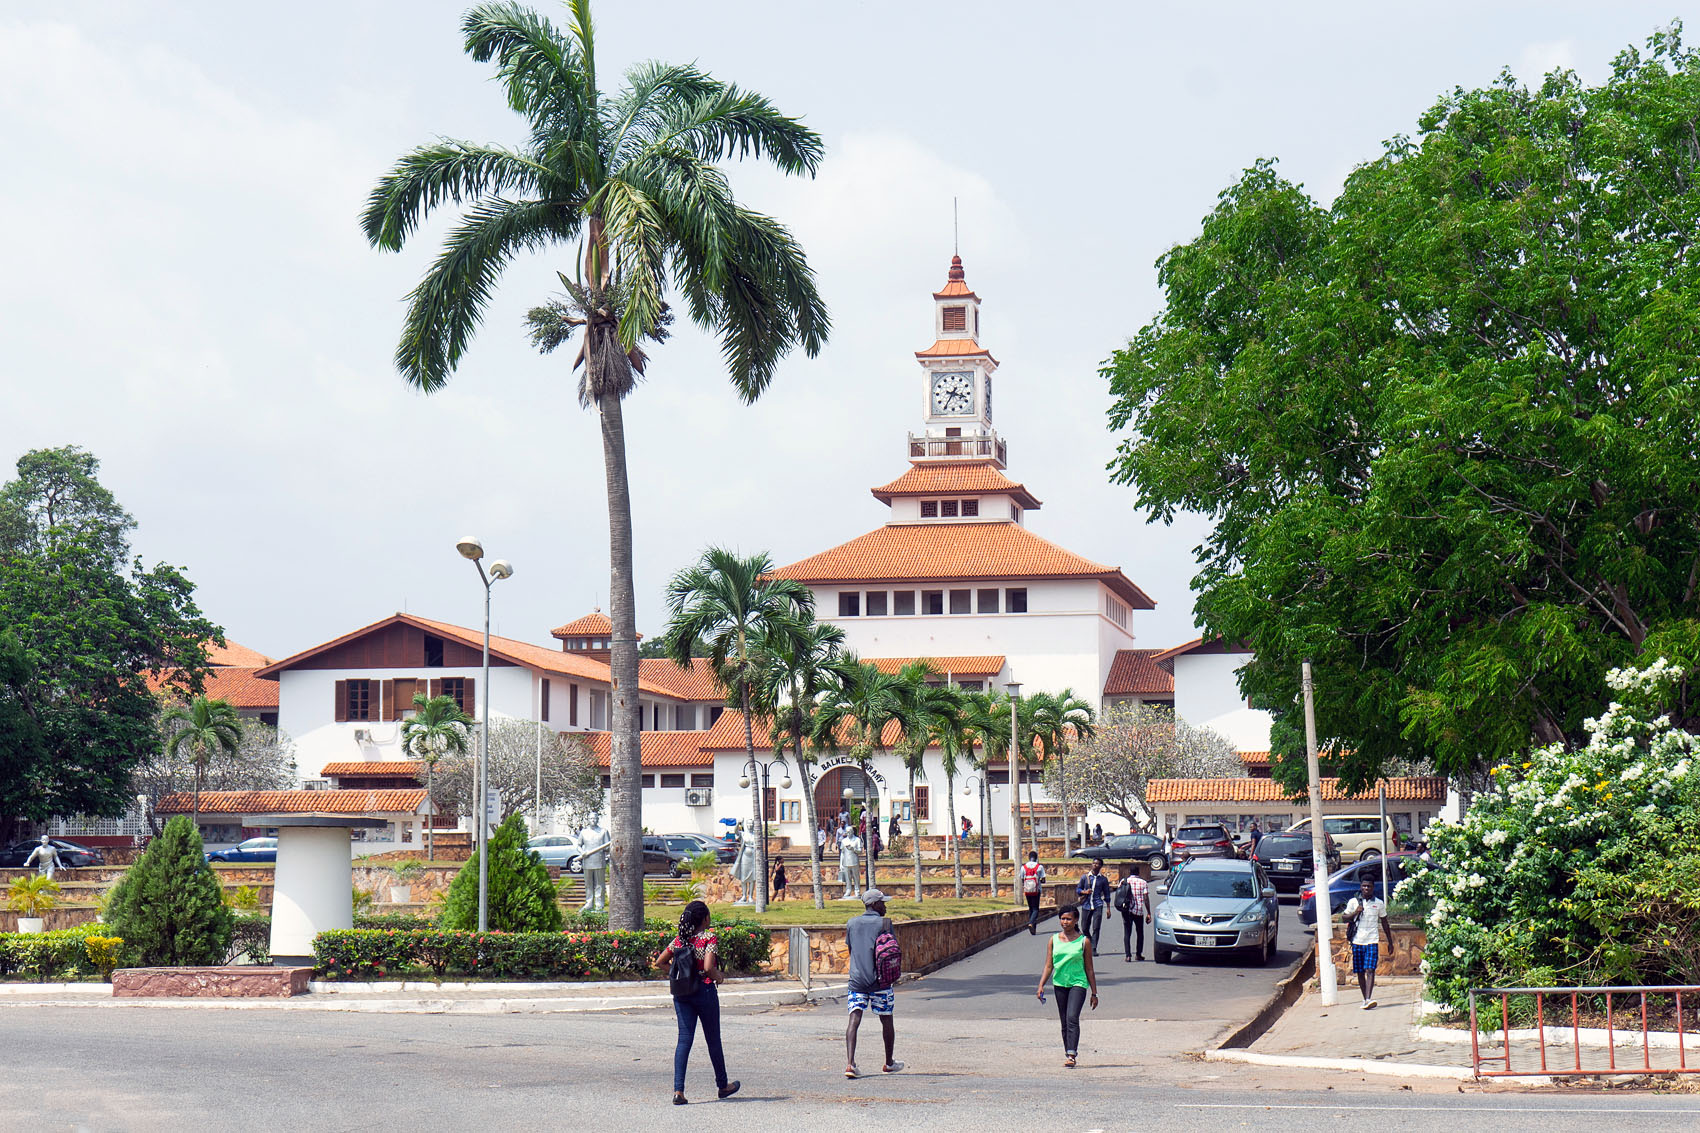 An Accra High Court has injuncted the University of Ghana from rolling out its new residential policy